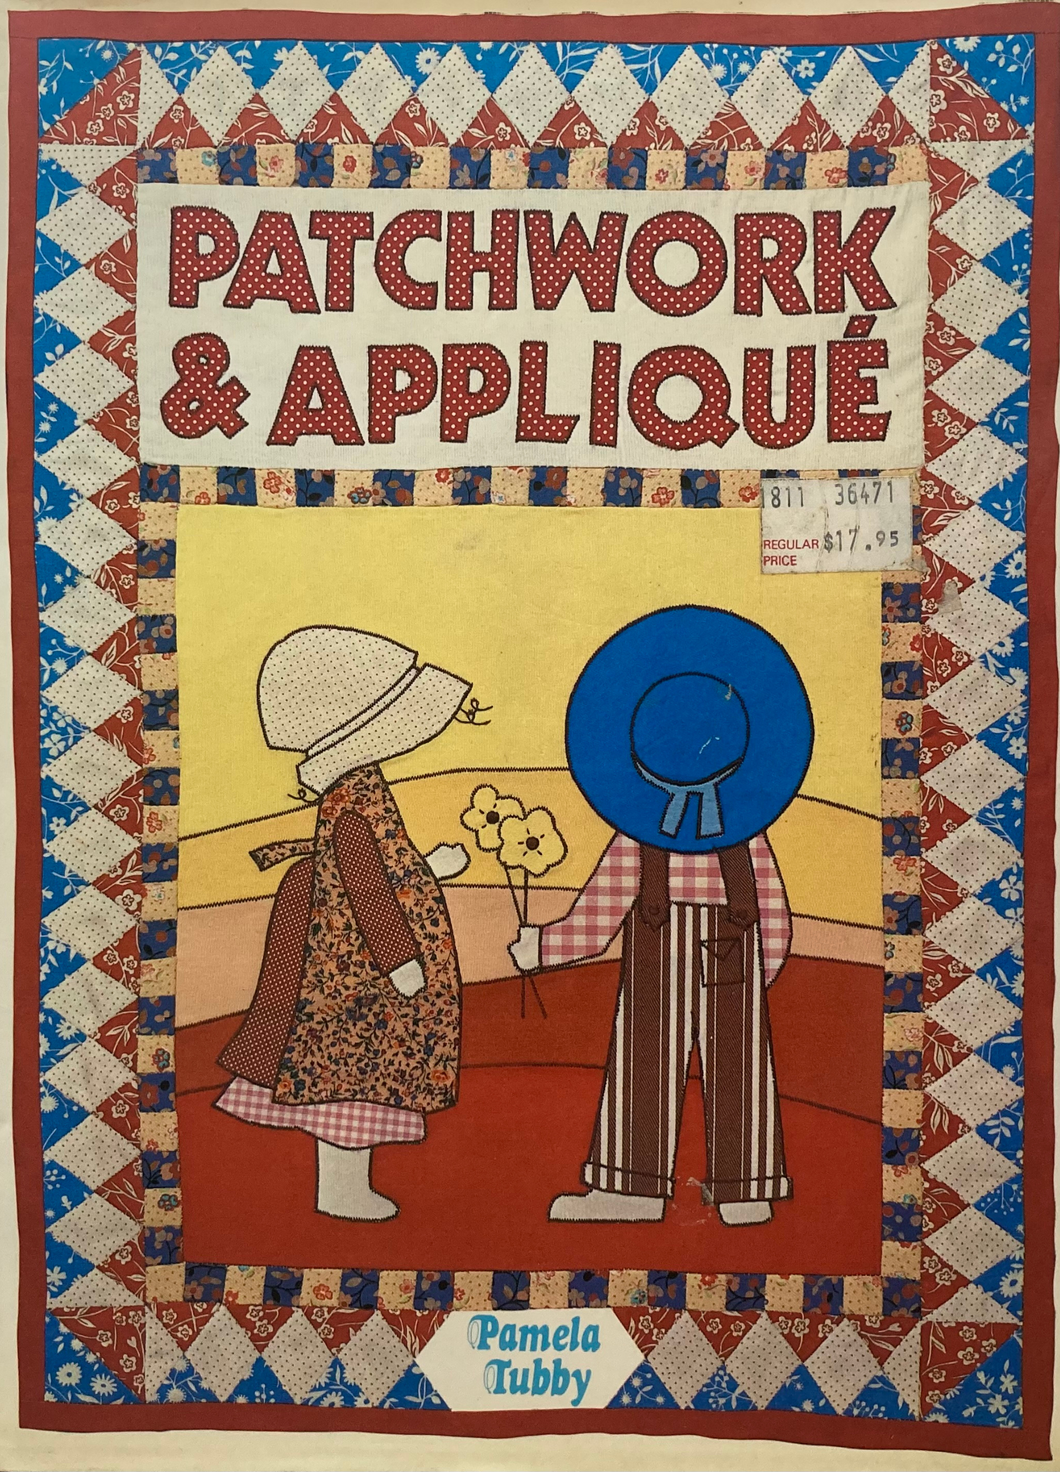 Patchwork & Applique by Pamela Tubby